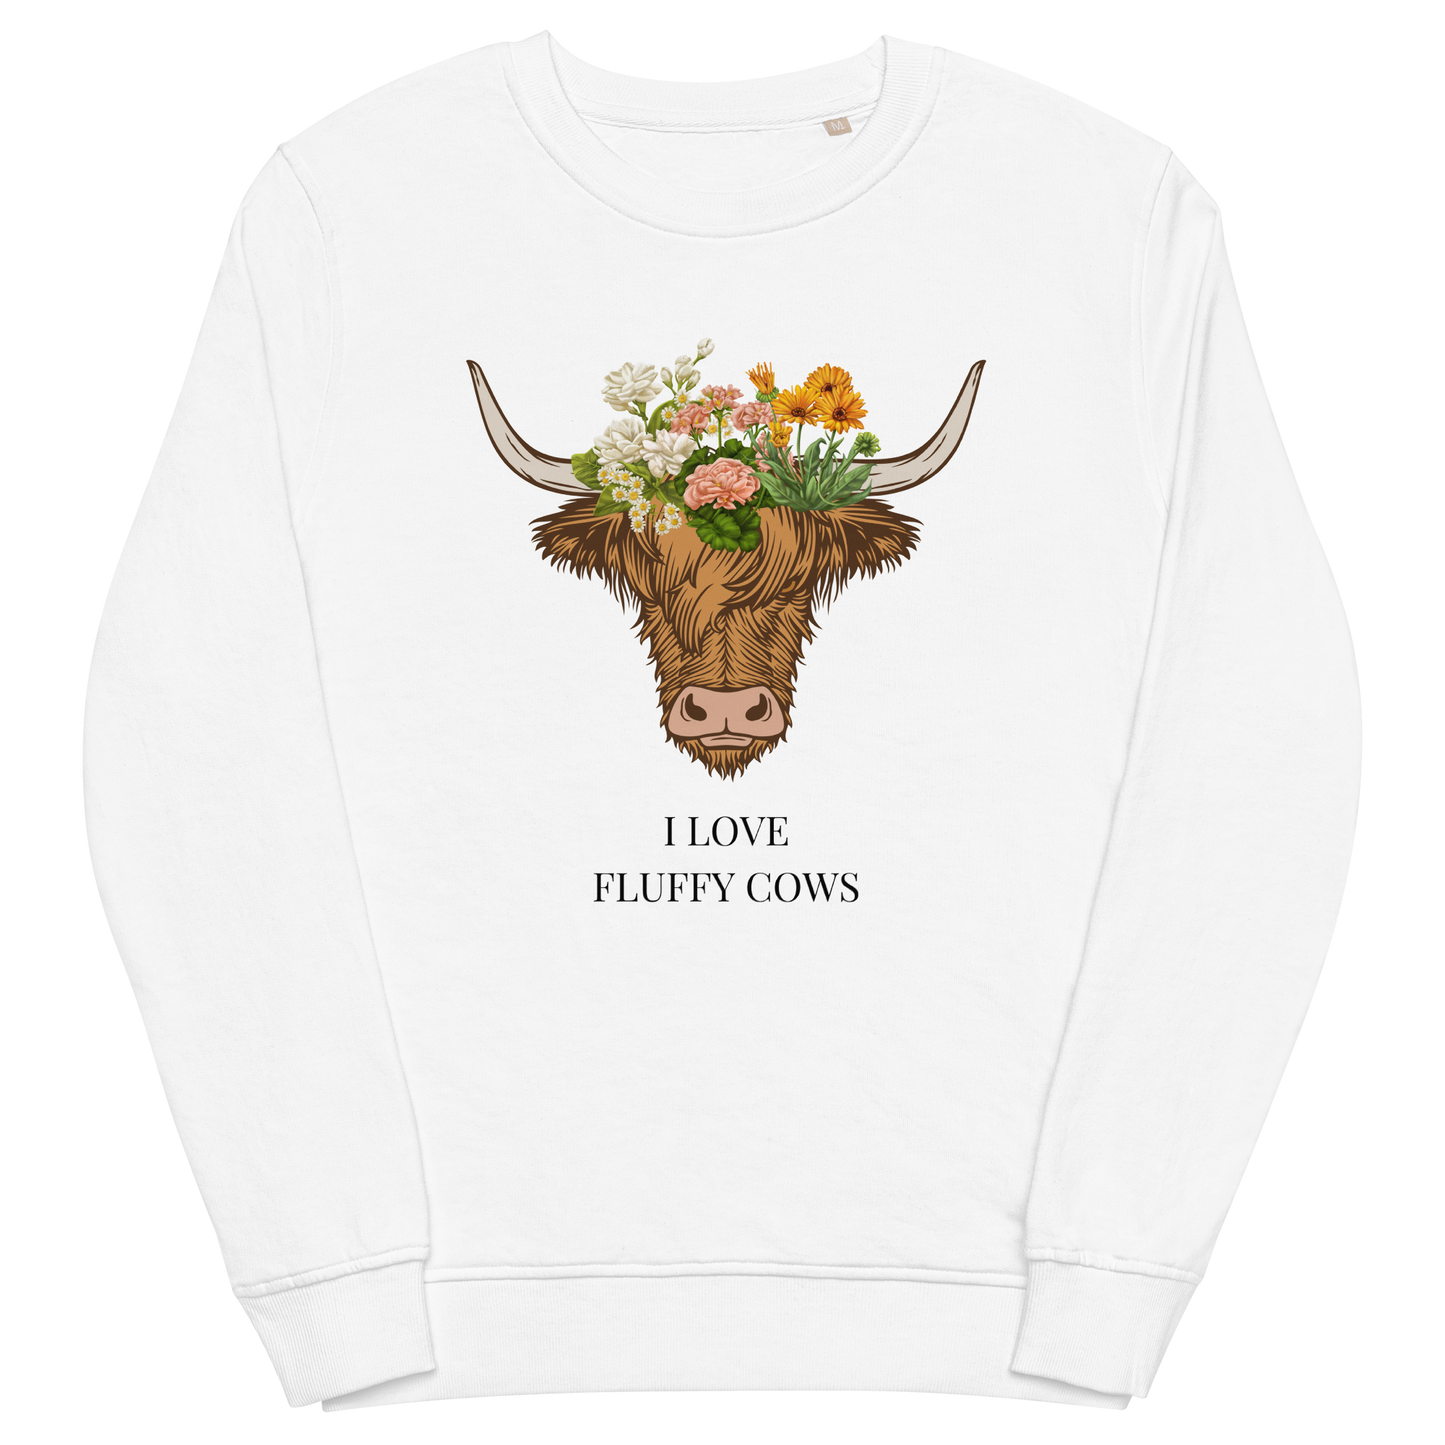 White Organic Cotton Highland Cow Sweatshirt featuring an adorable I Love Fluffy Cows graphic on the chest - Cute Graphic Highland Cow Sweatshirts - Boozy Fox